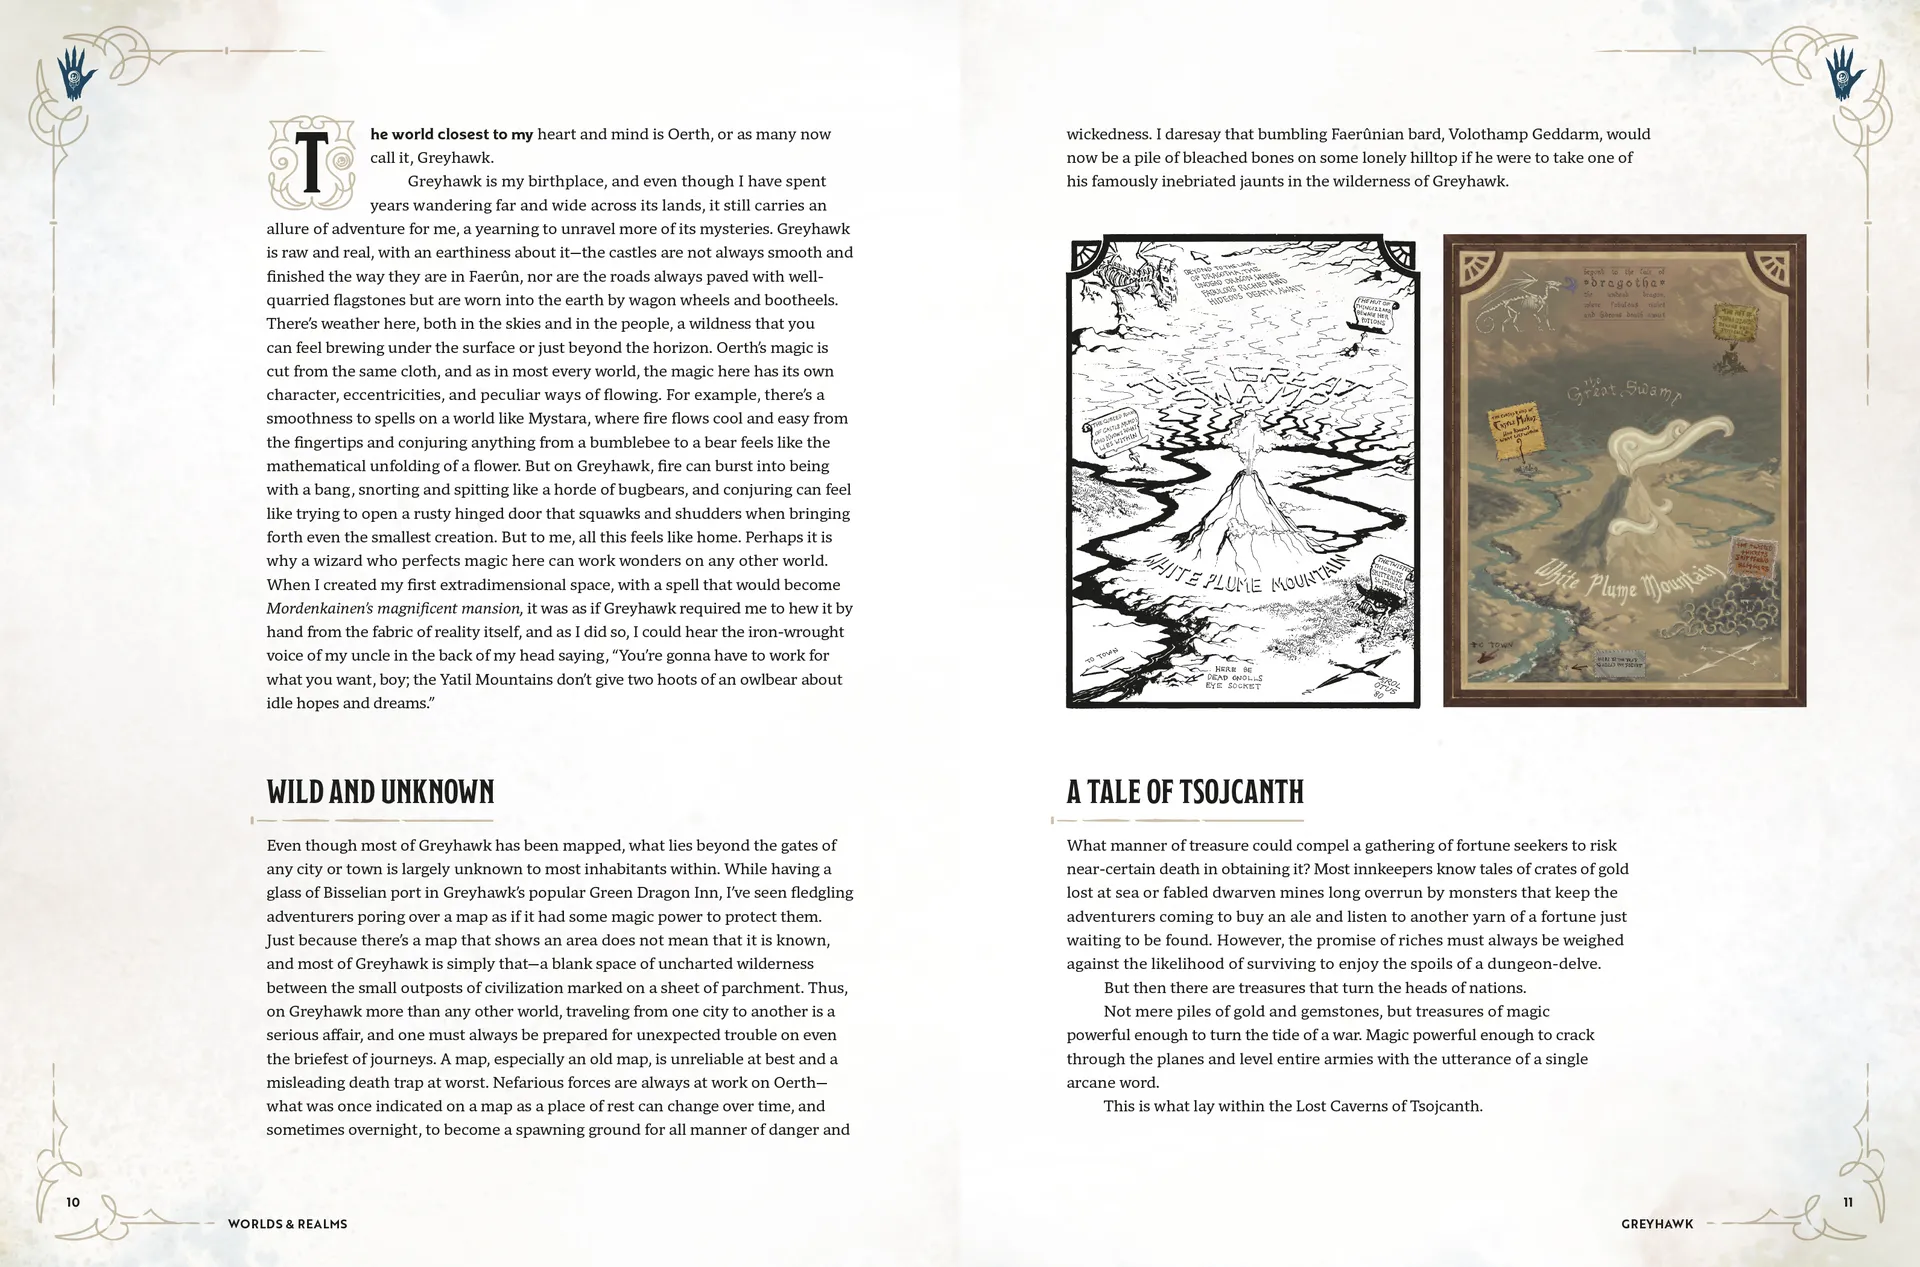 LEE_Worlds_and_Realms_EDW_spreads__1__6_copy.webp